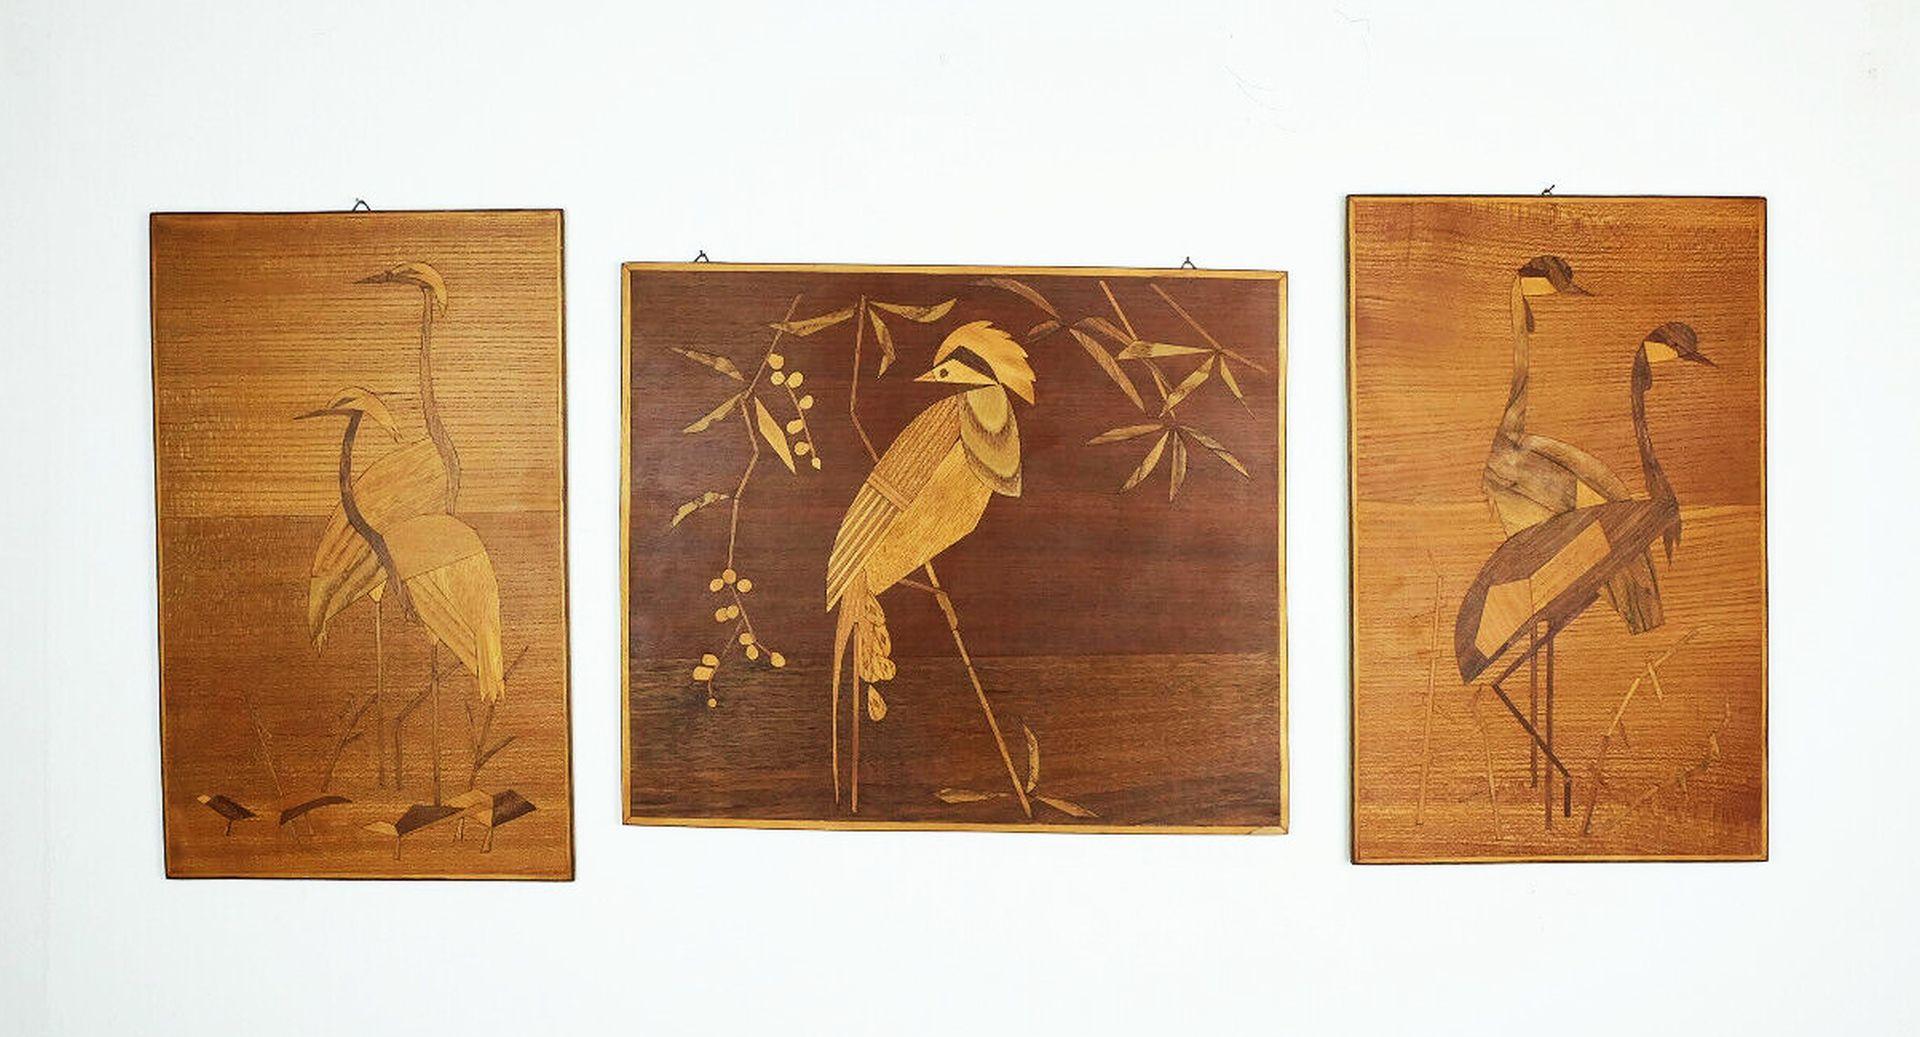 Set of three perfectly crafted intarsia pictures from the 1950s to 60s. Various wood veneers on chipboard, the surfaces are oiled. Very nice stylized depiction of birds.

A typical mid century artwork and a great addition to any modernist interior.